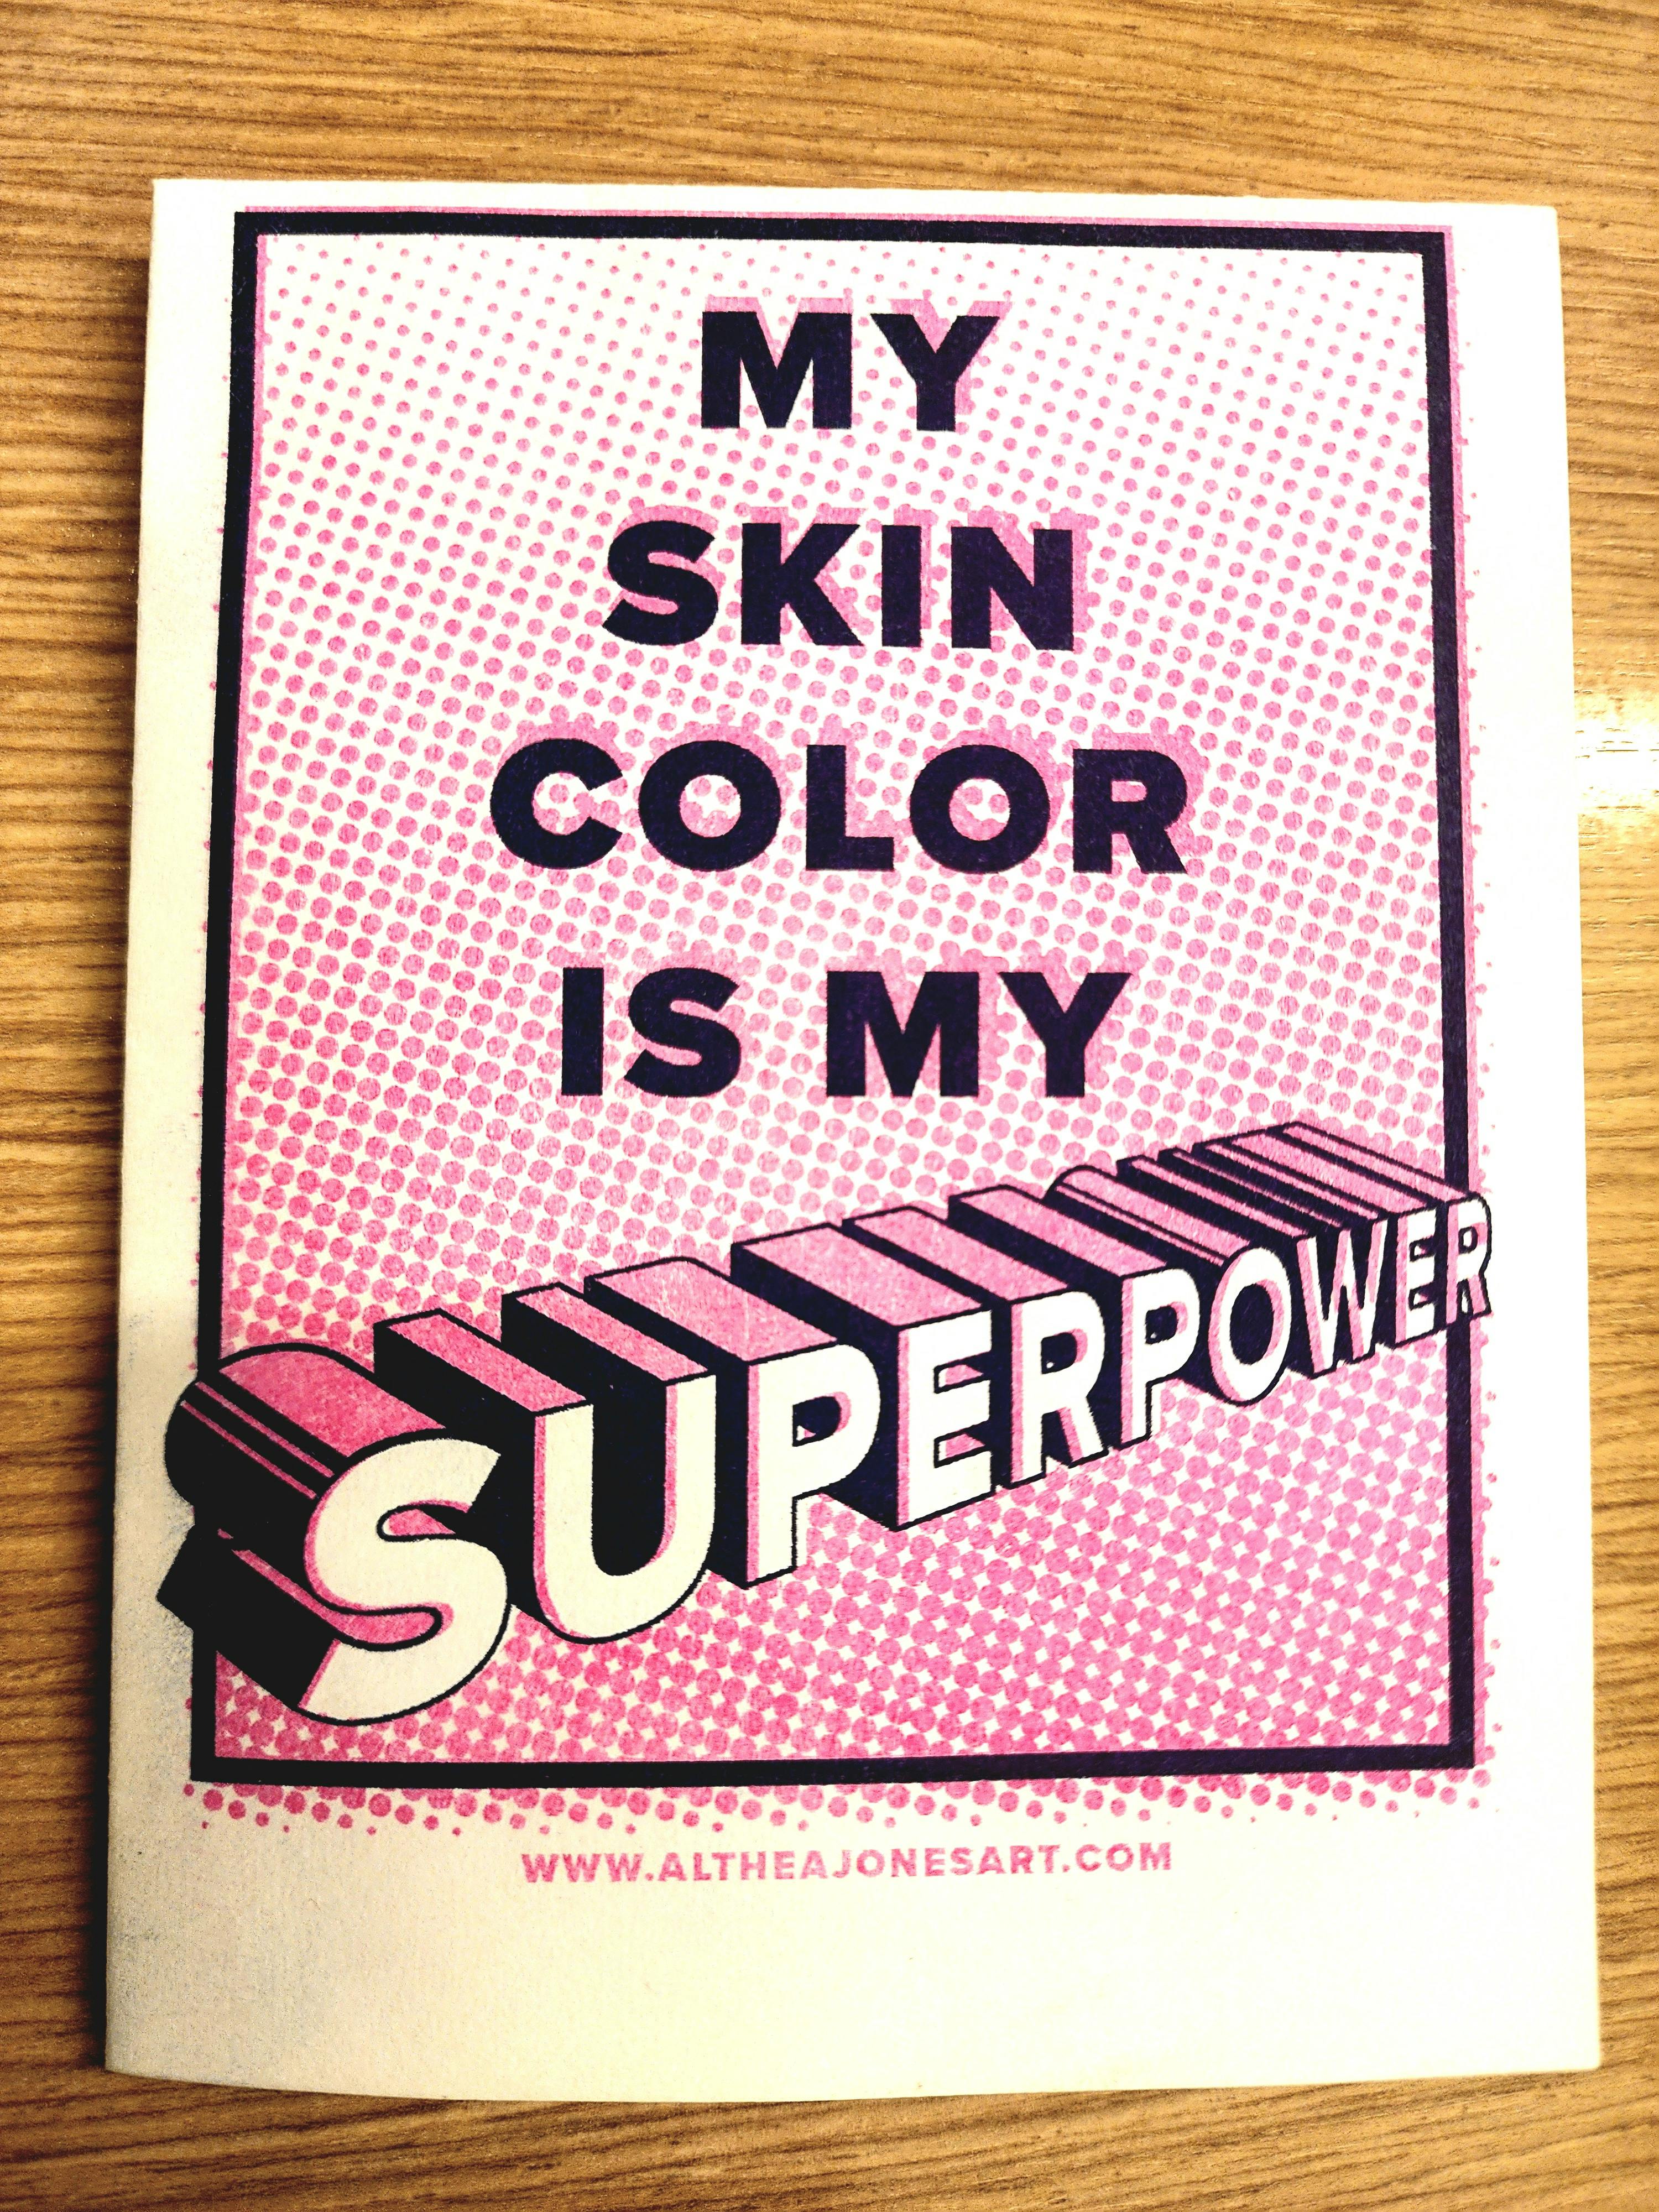 Flyer for My Skin Color Is My Superpower